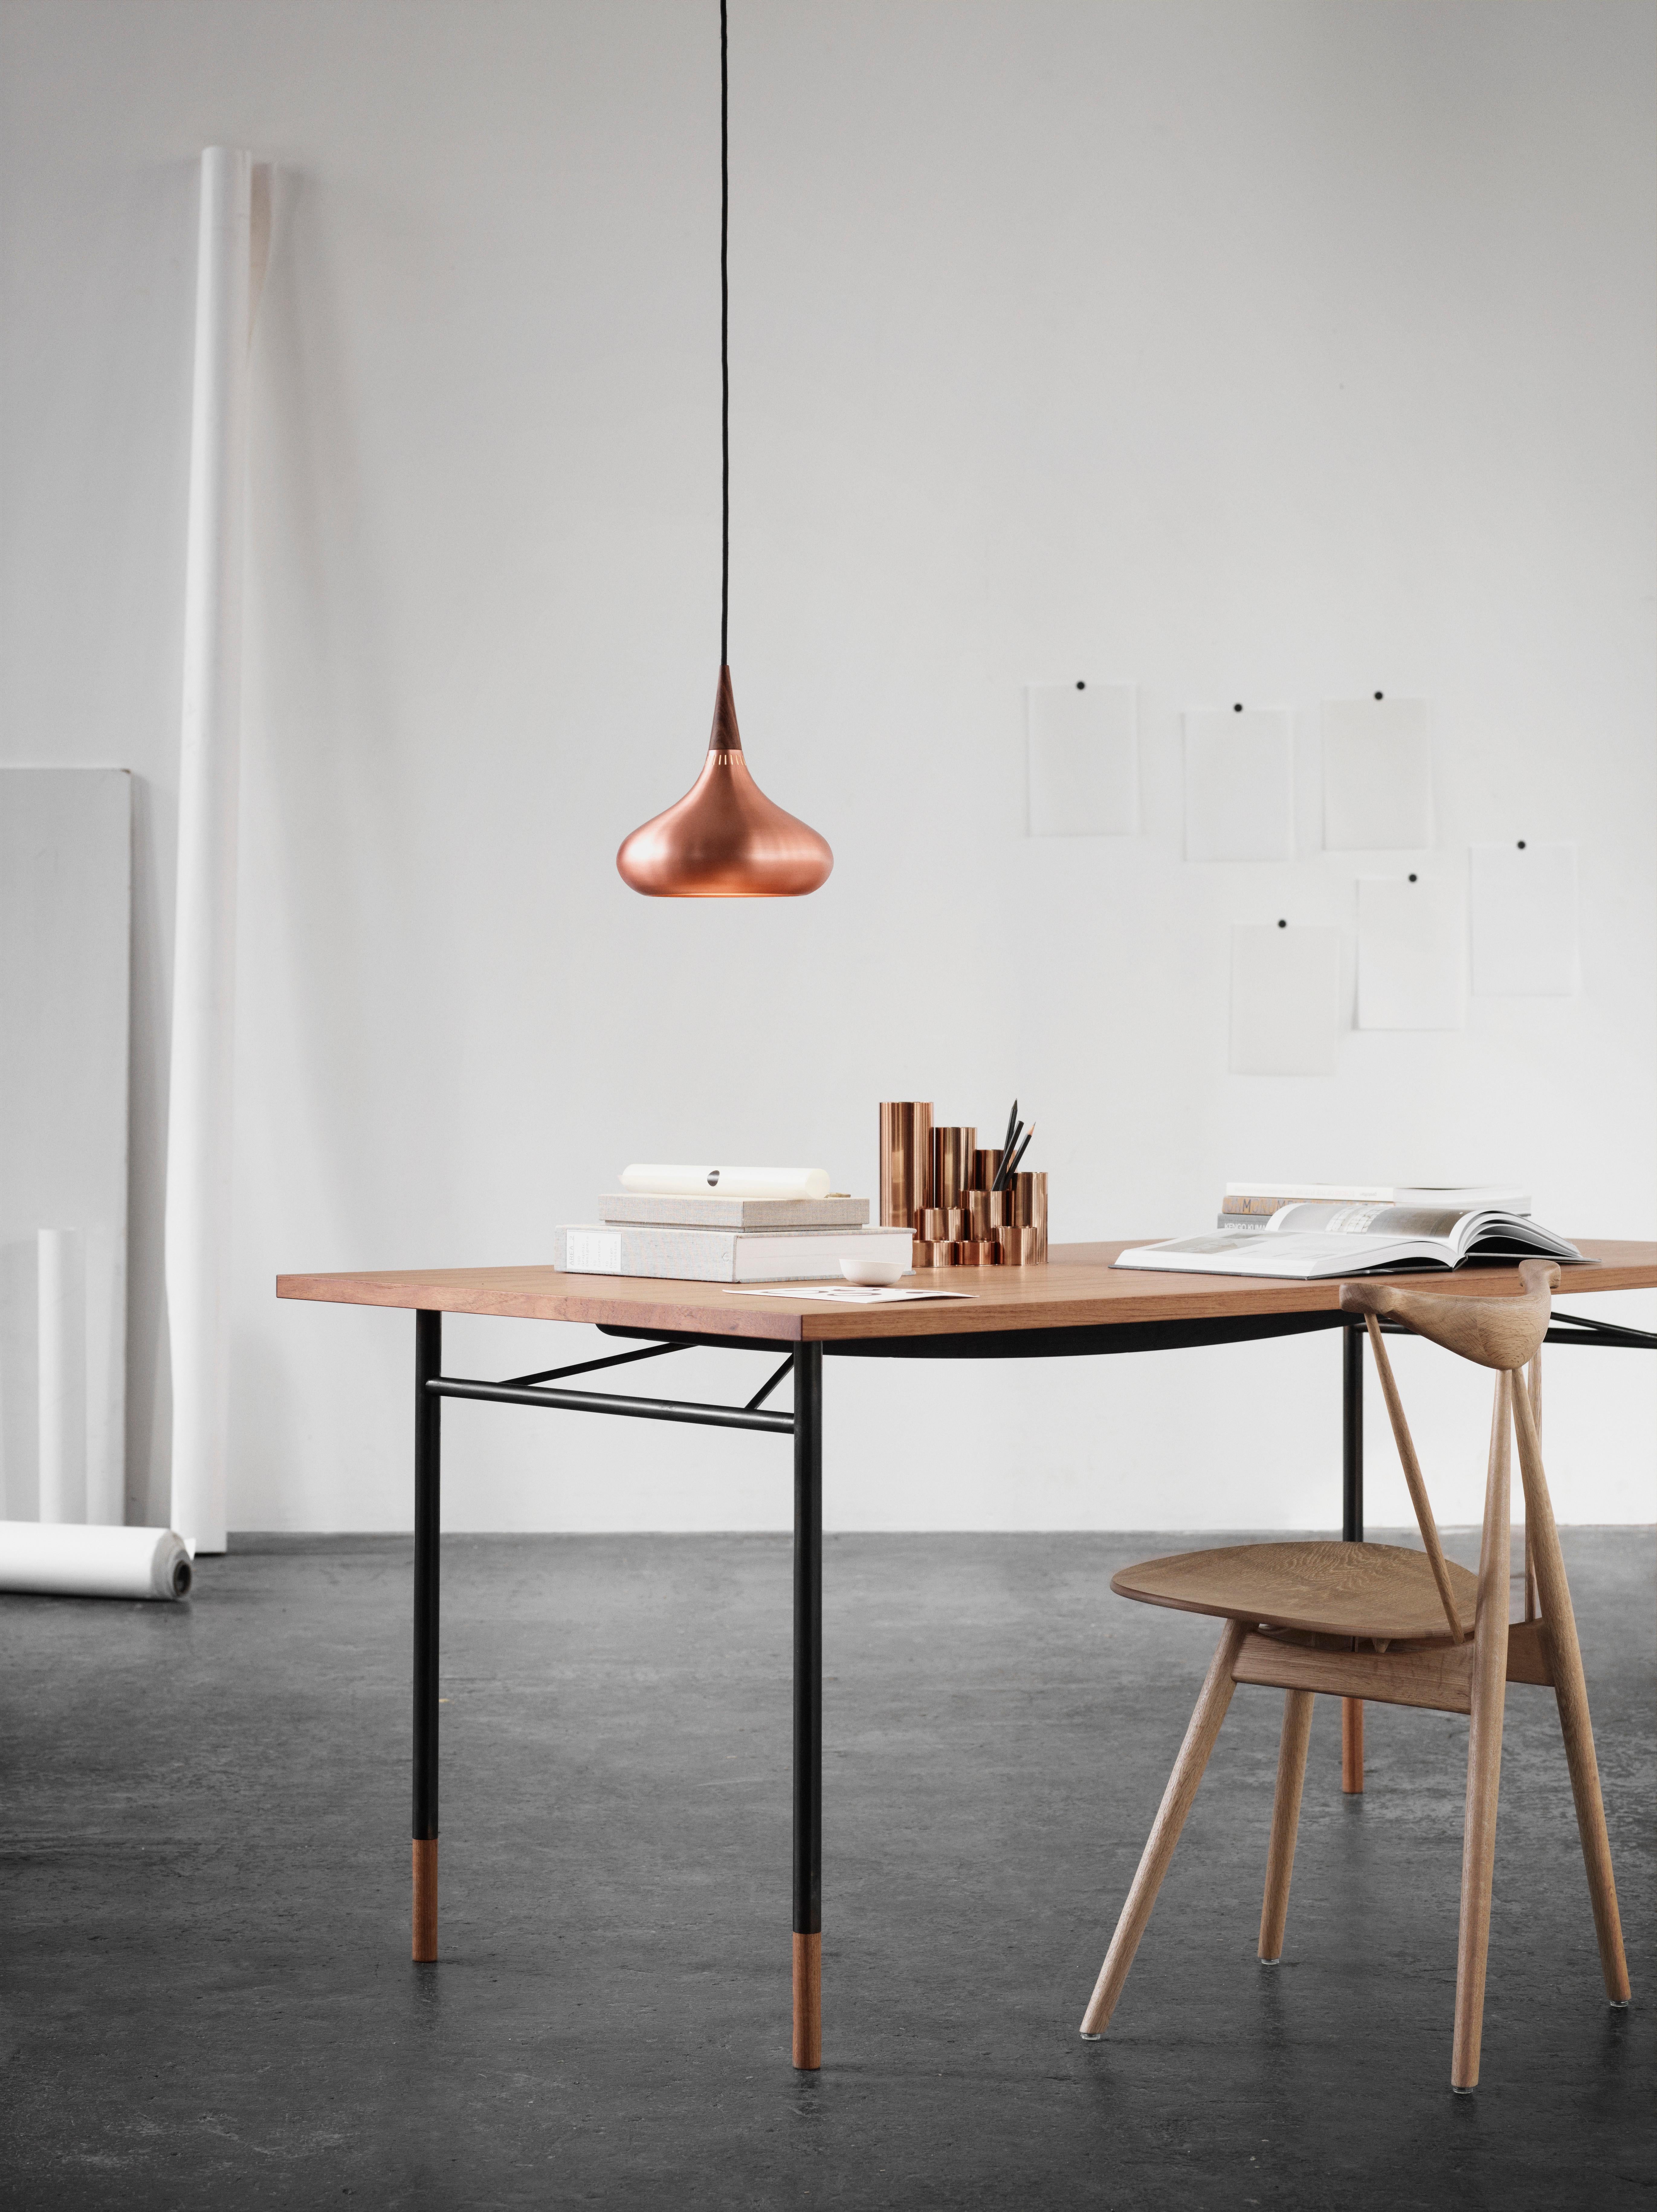 Small Jo Hammerborg 'Orient' Pendant Lamp for Fritz Hansen in Black and Rosewood For Sale 8